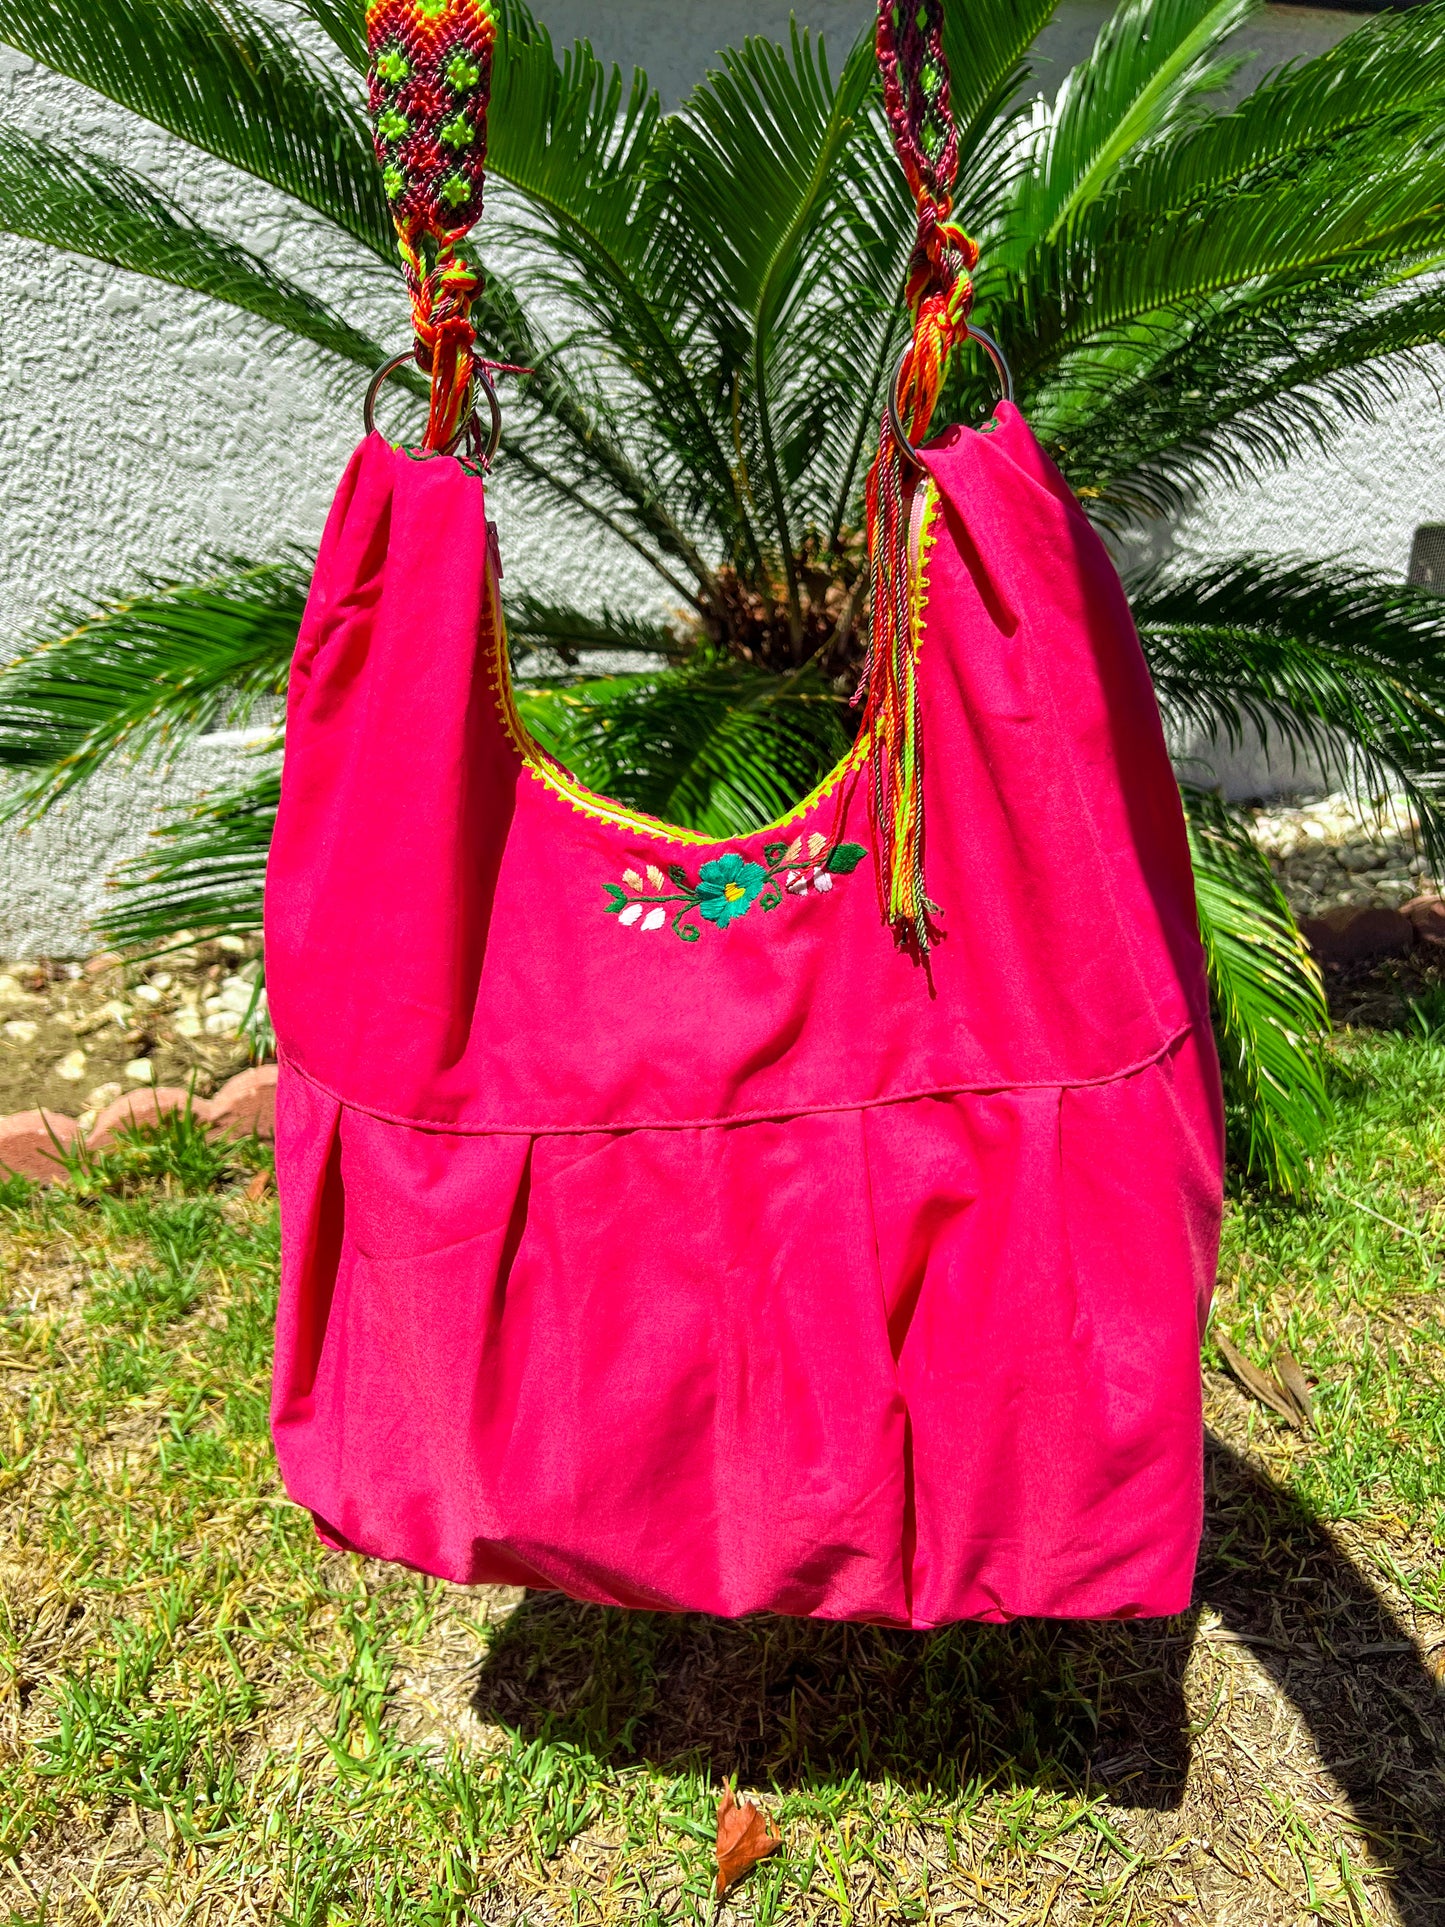 Embroidered Morral Purse